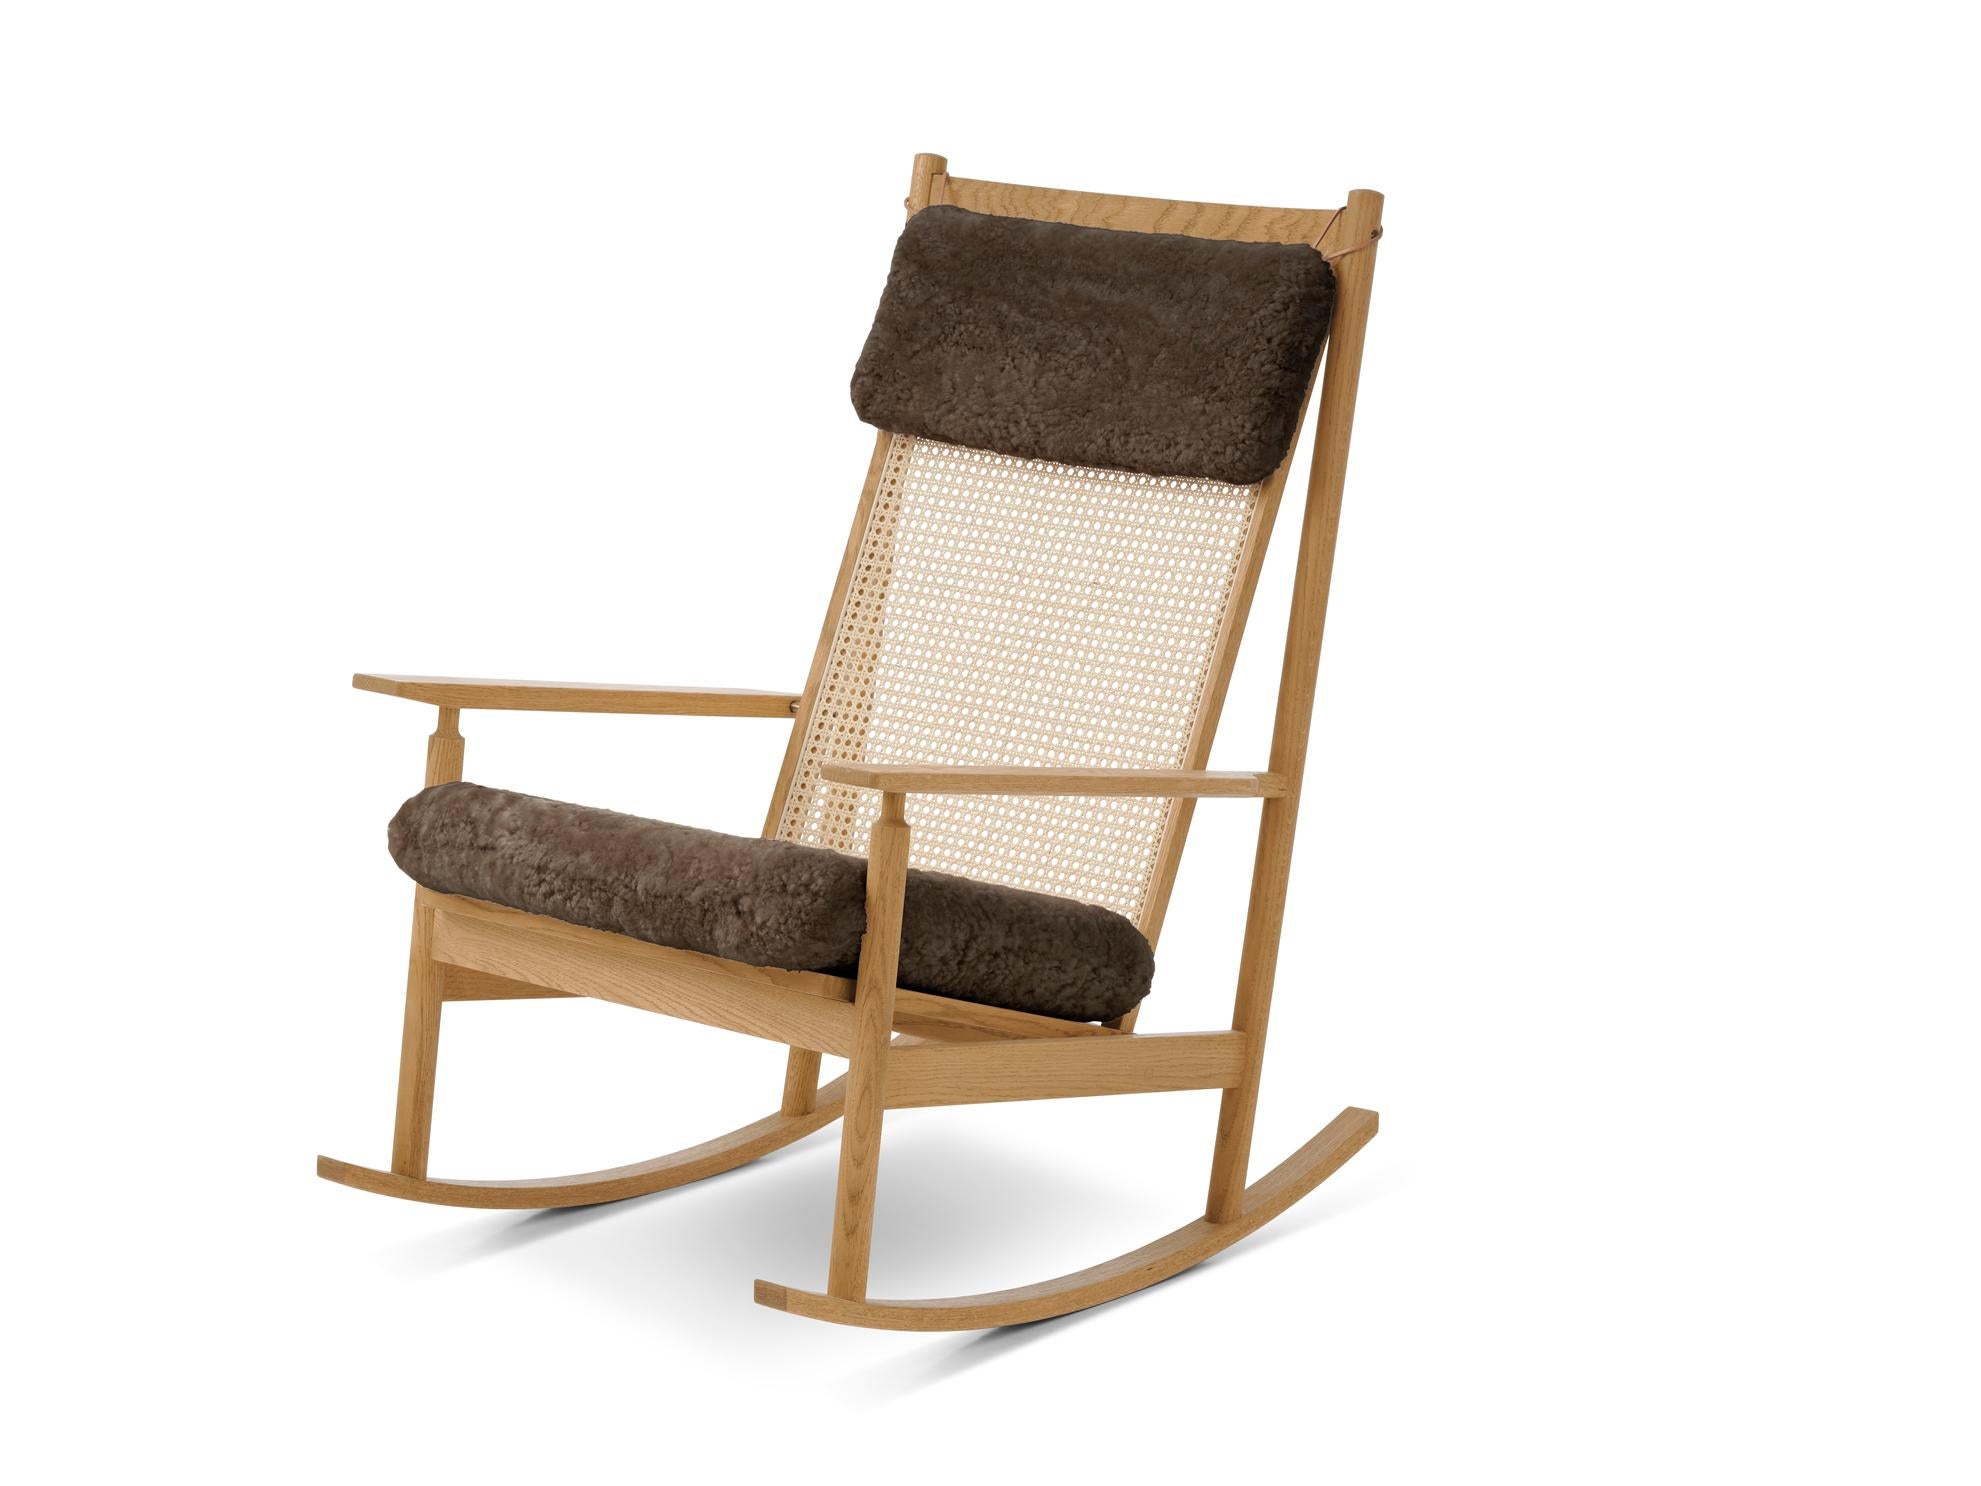 Swing rocking chair sheepskin oak drake by Warm Nordic
Dimensions: D91 x W68 x H 103 cm
Material: Wood, Foam, Rubber springs, French cane, Textile or leather upholstery, Oak, Sheepskin upholstery
Weight: 16.5 kg
Also available in different